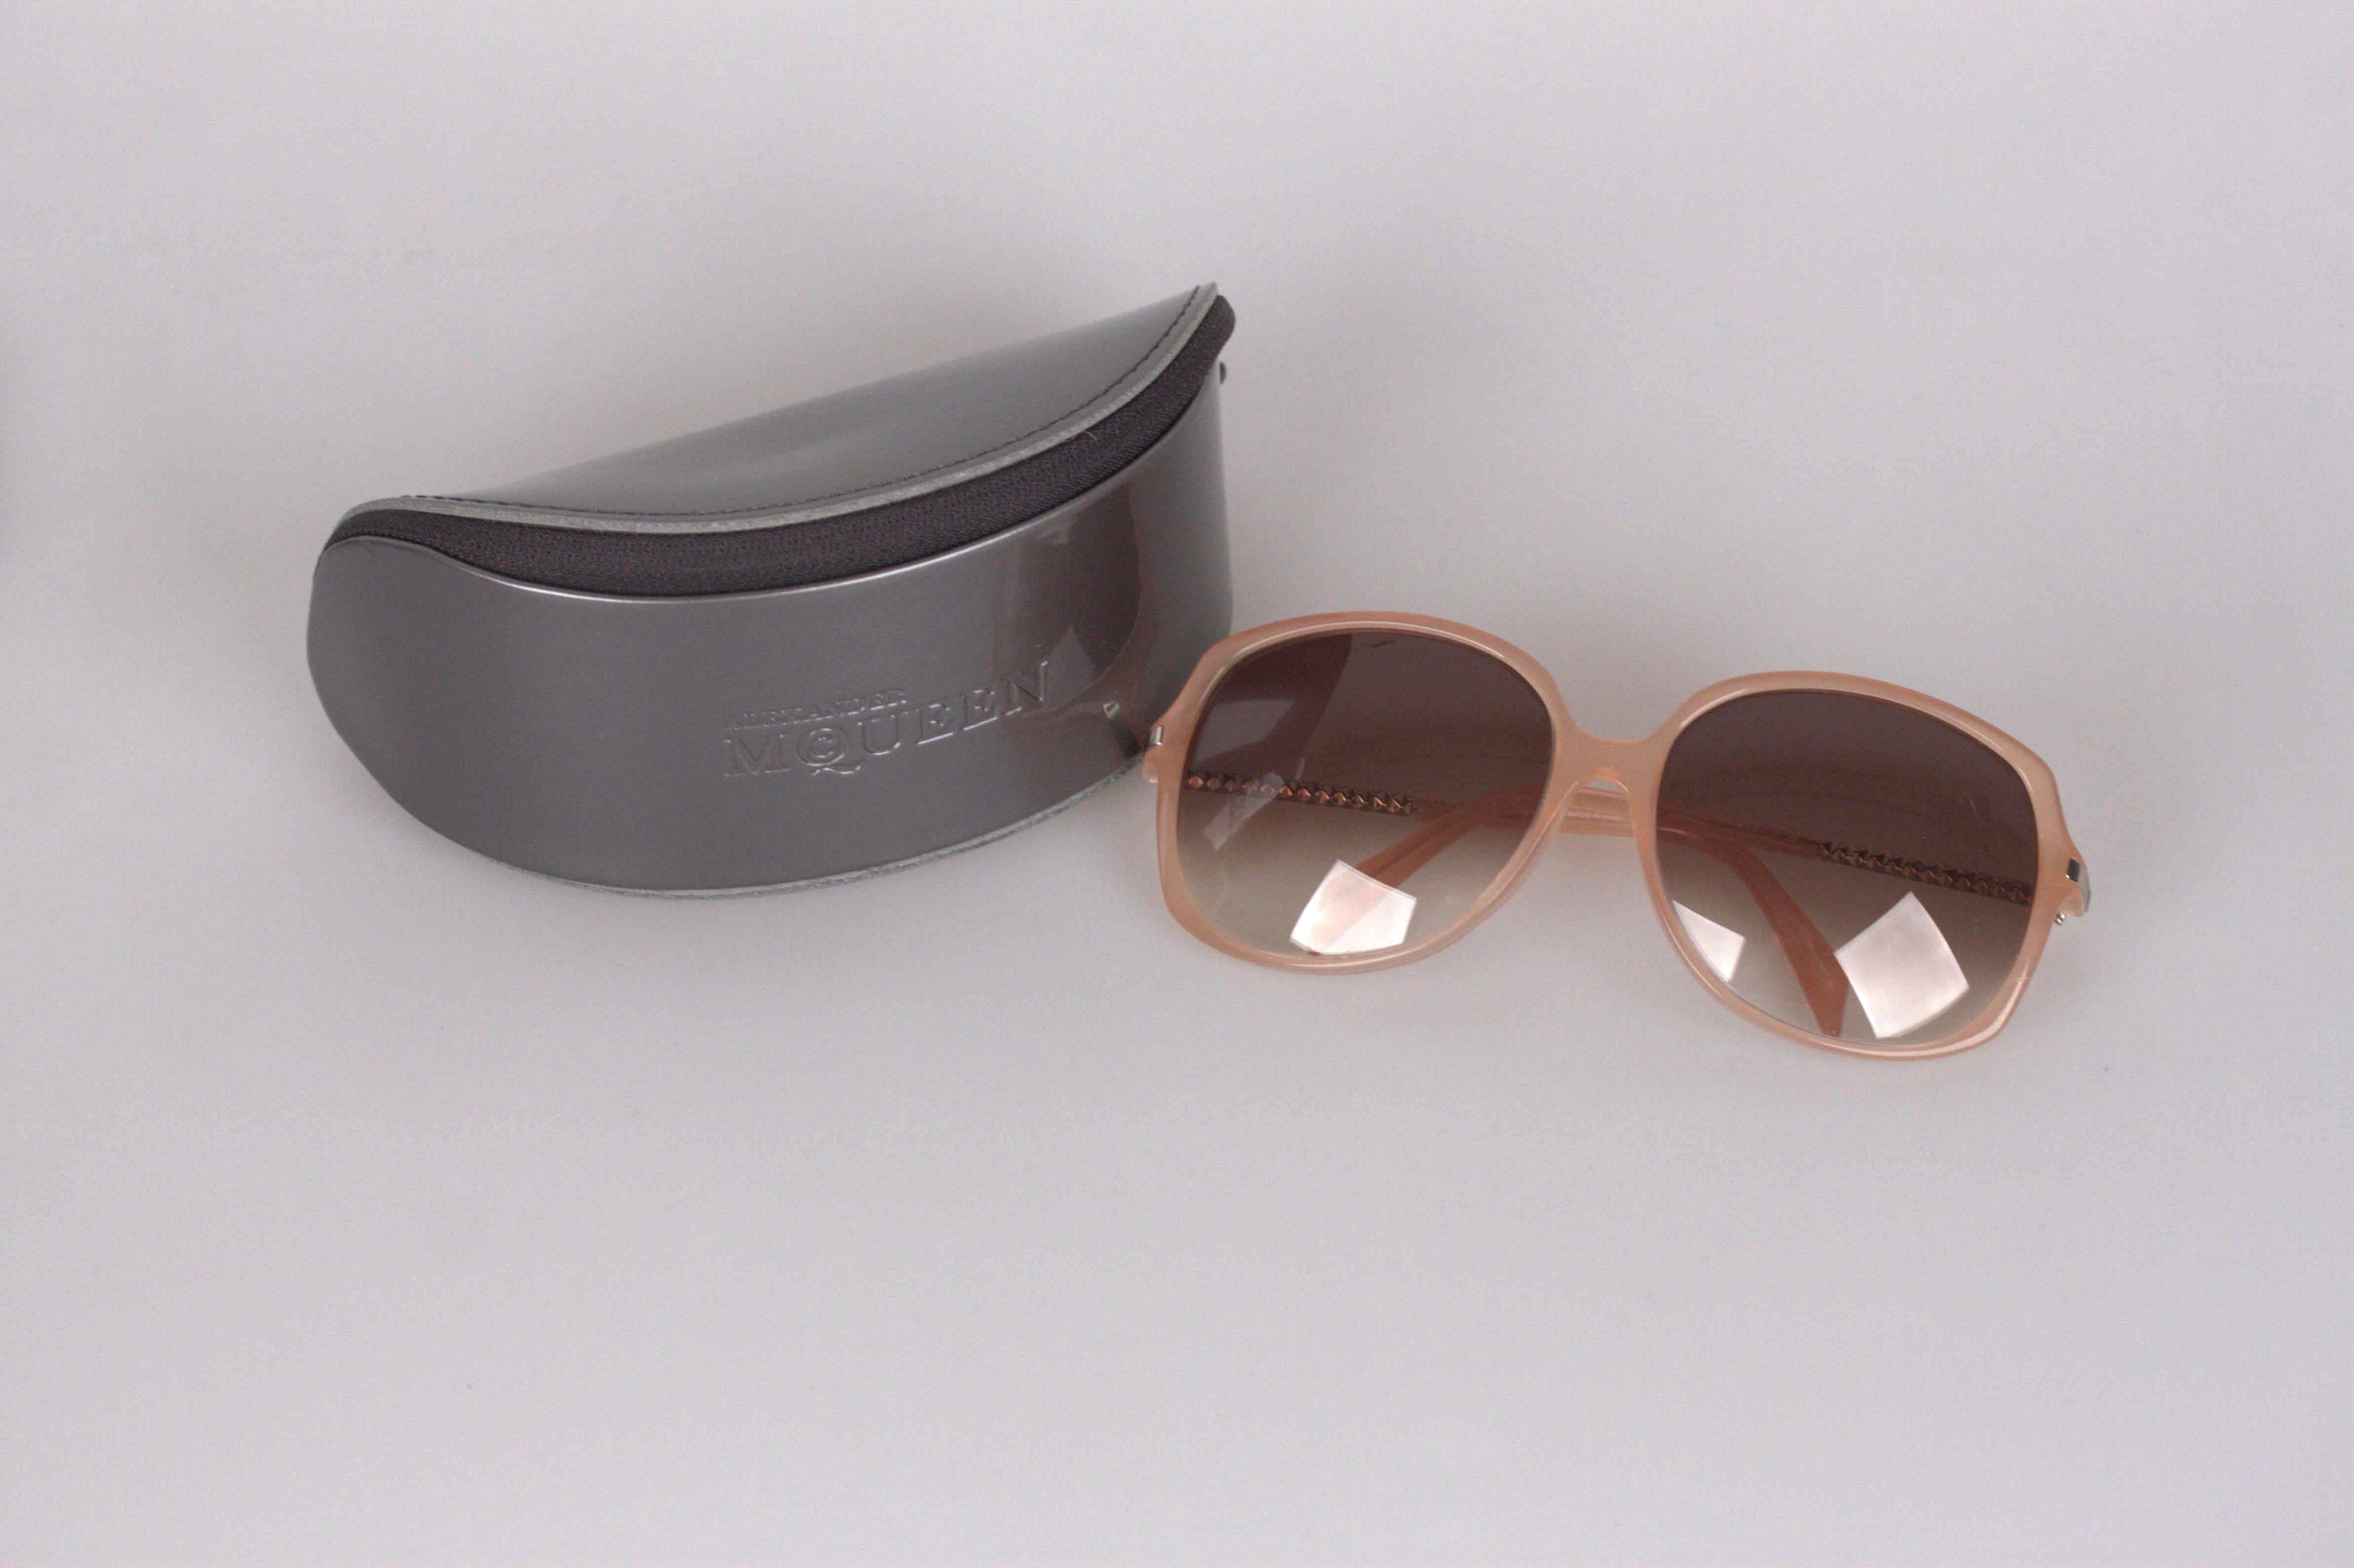 NEW; MINT & BOXED!

Alexander McQueen, Made in Italy

Model refs: AMQ 4171/S - 61/16 - 135 - NF102

Pink frame, with Light Brown GRADIENT 100% UV lens

It will come with its original semi-rigid case & cleaning cloth

Measurements:

-